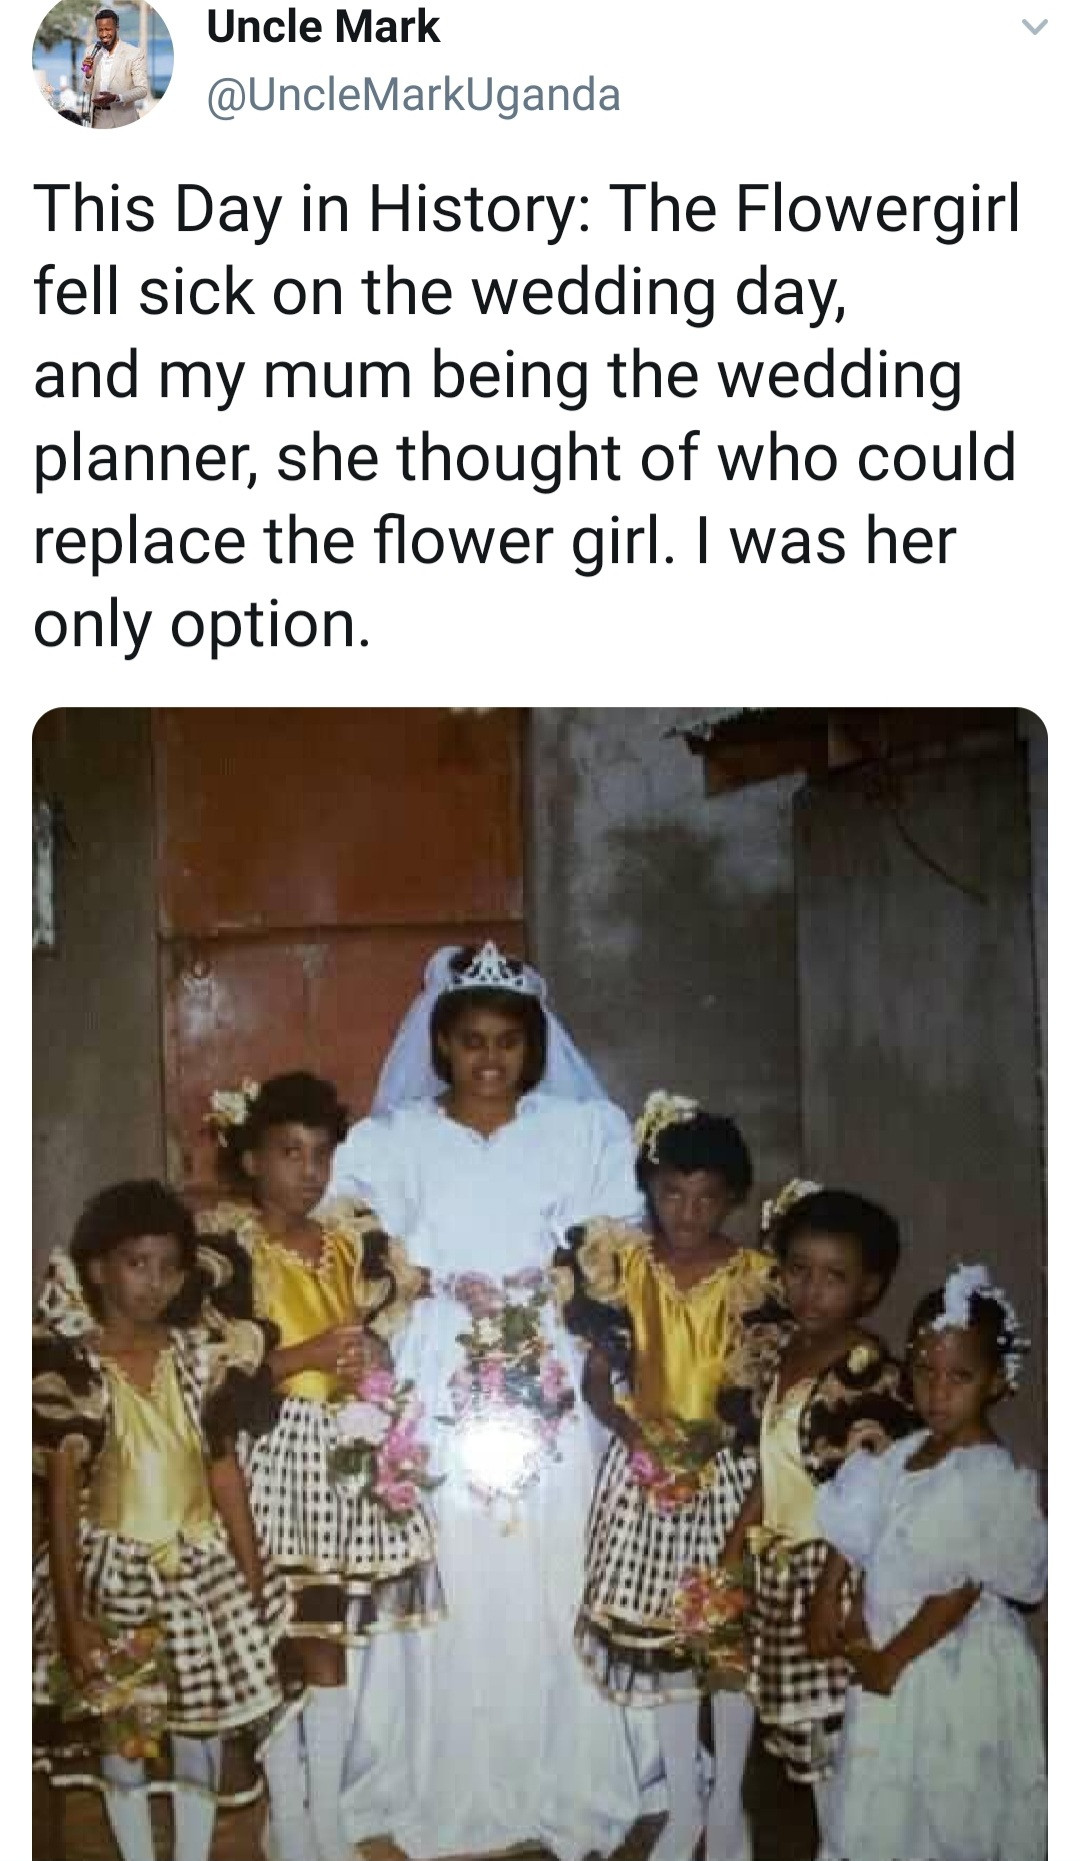 Man recounts how his mother made him a little bride at a wedding